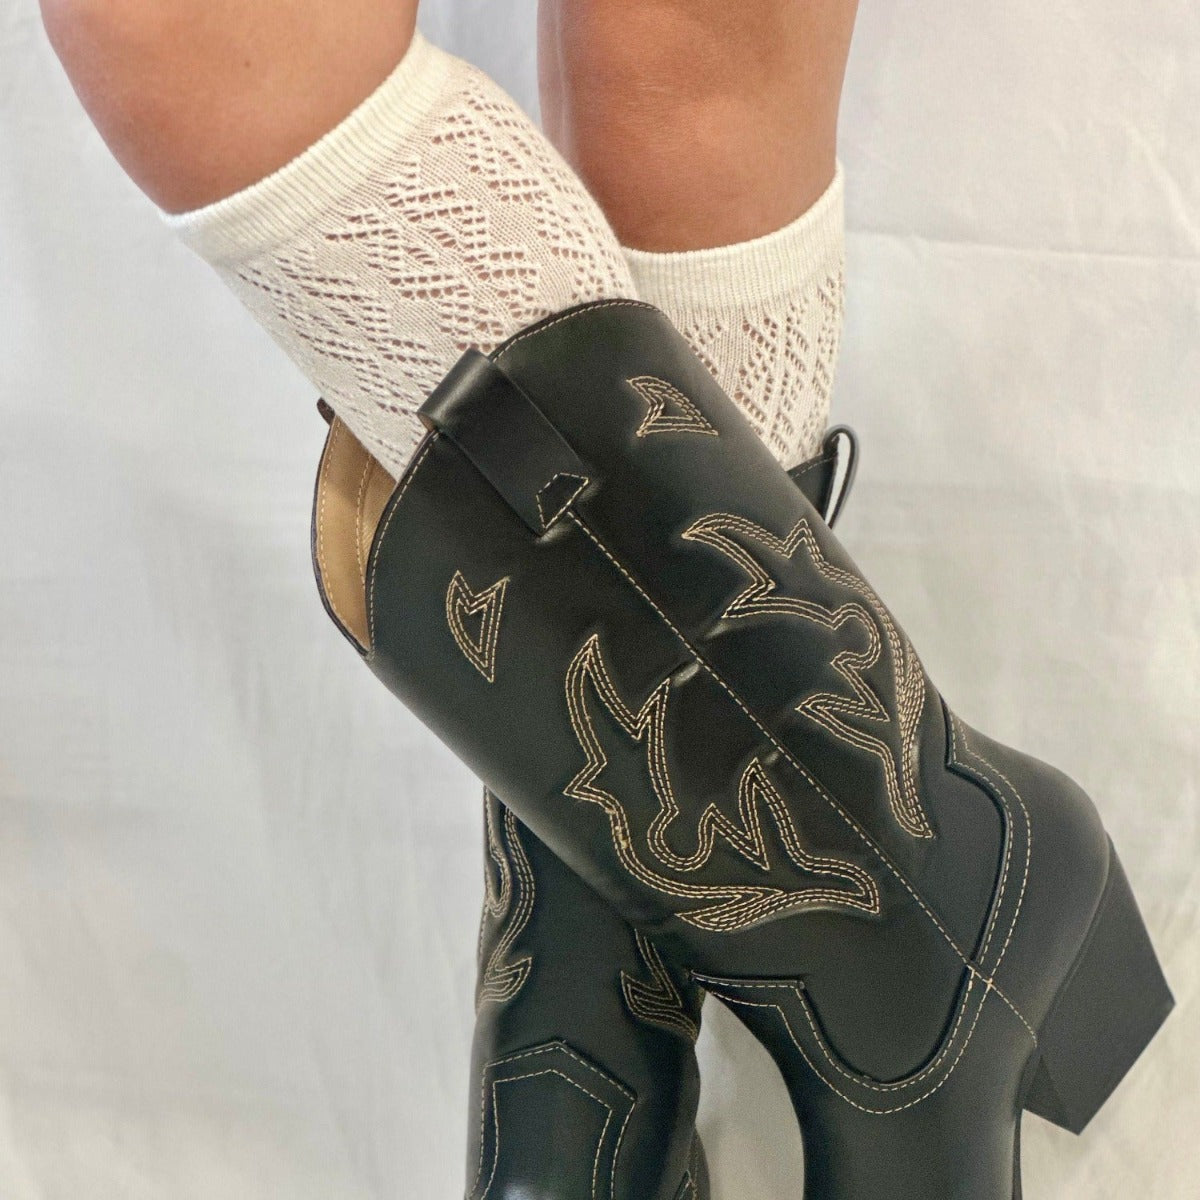 socks womens cowboy boots fashion - catherine cole atelier, best socks for cowgirl boots near me western